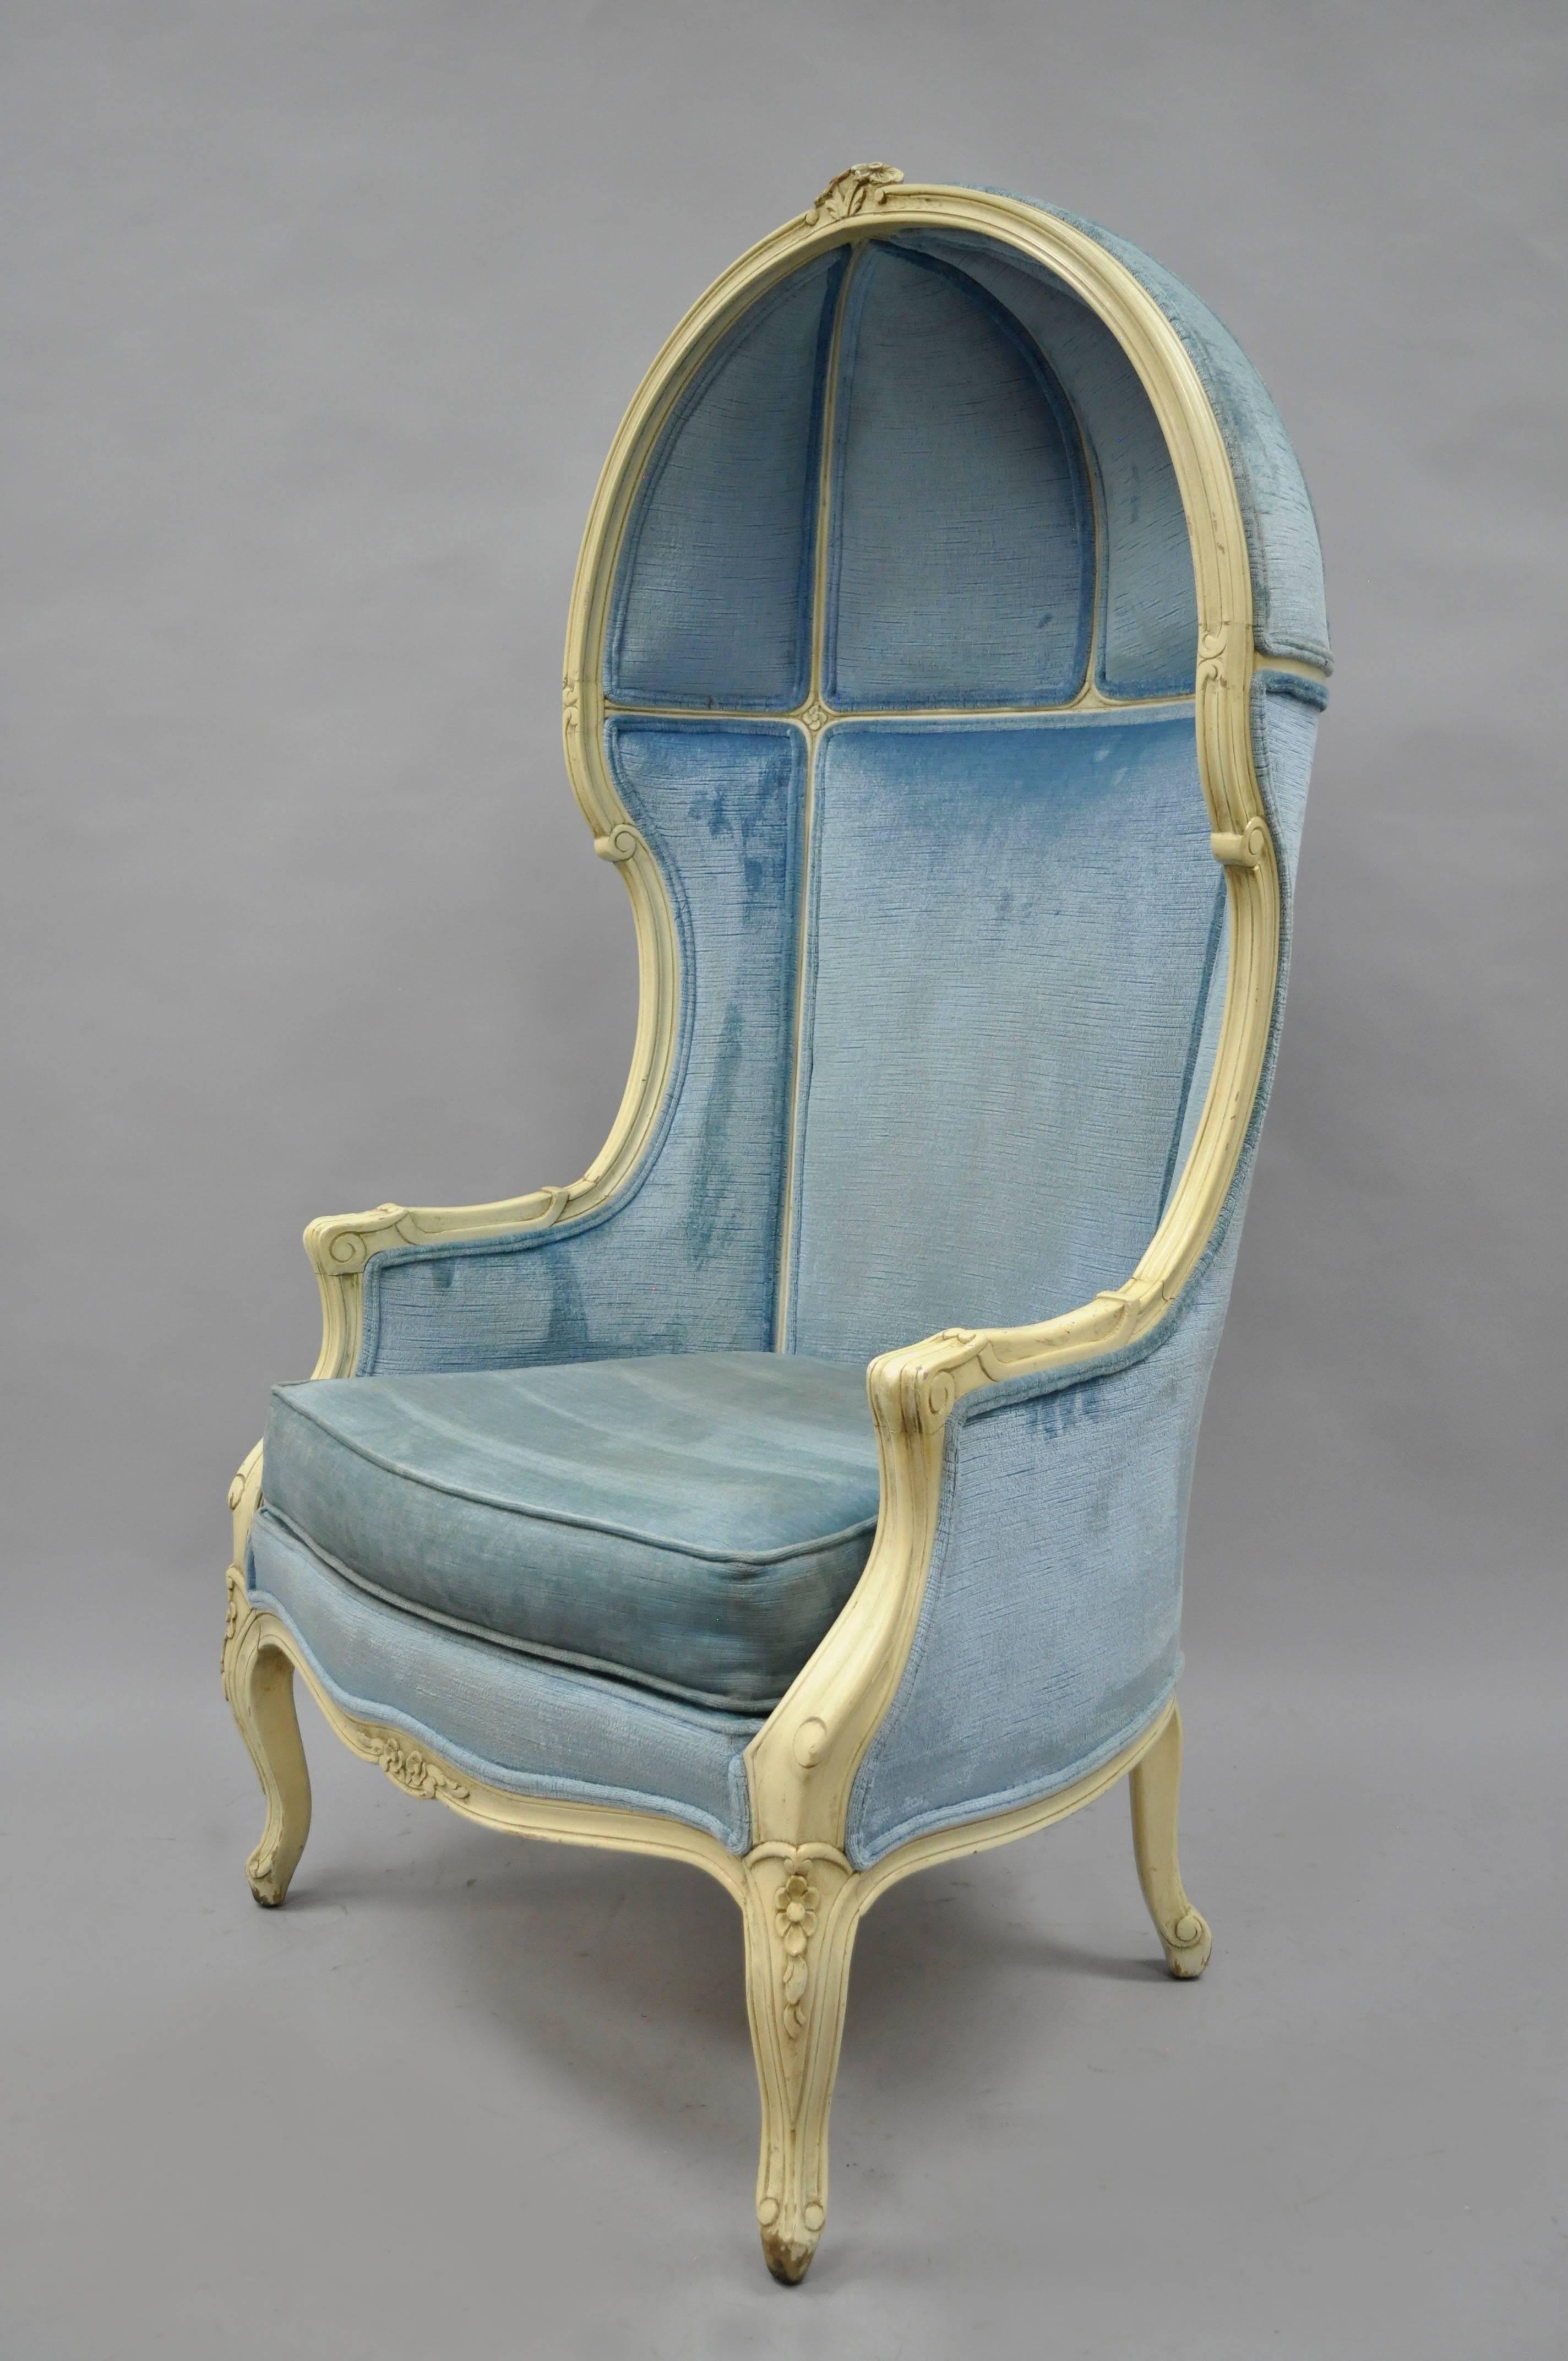 Vintage French Provincial / Louis XV style blue upholstered Italian canopy porter's chair. Item features an upholstered solid carved wood Italian frame, cream painted finish, loose cushion, shapely cabriole legs, and Classic French style.